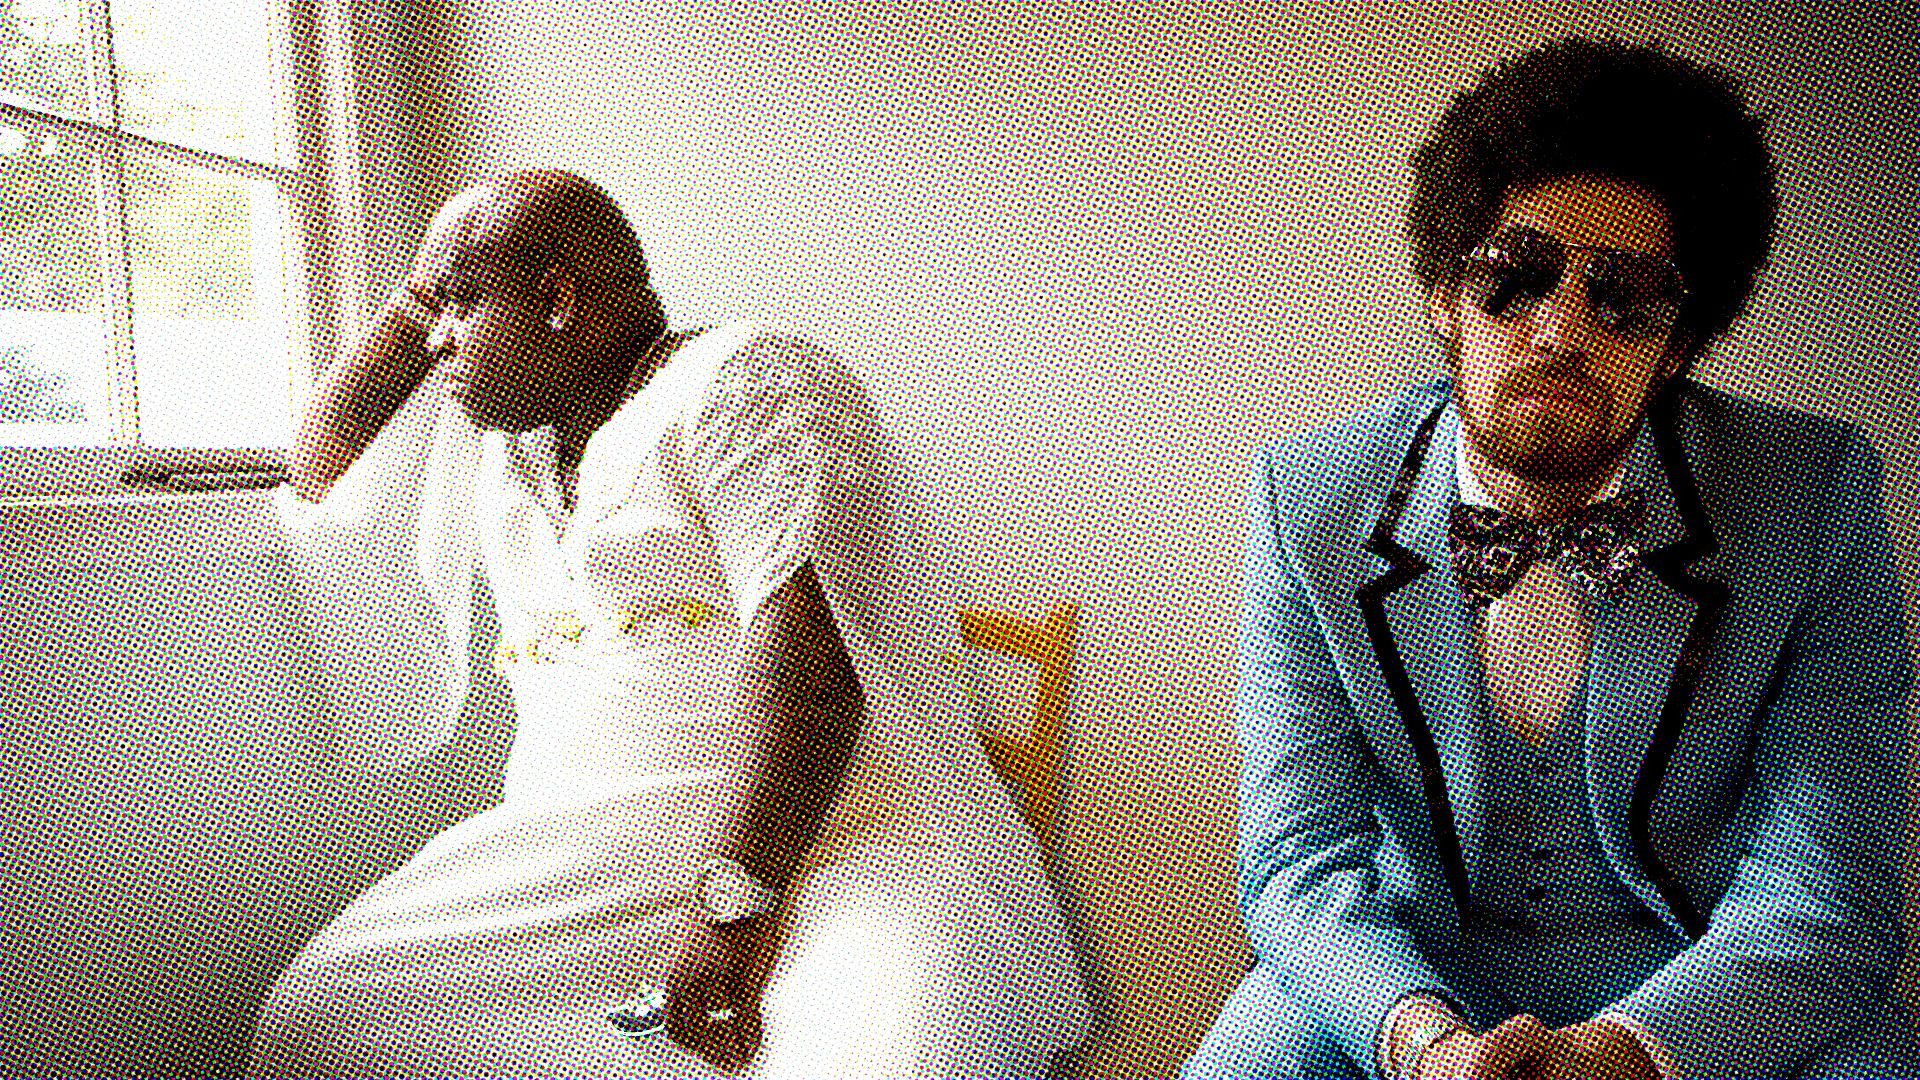 Worries and Fears Become Your Friends: Mental Disorder and Gnarls Barkley’s “Crazy”